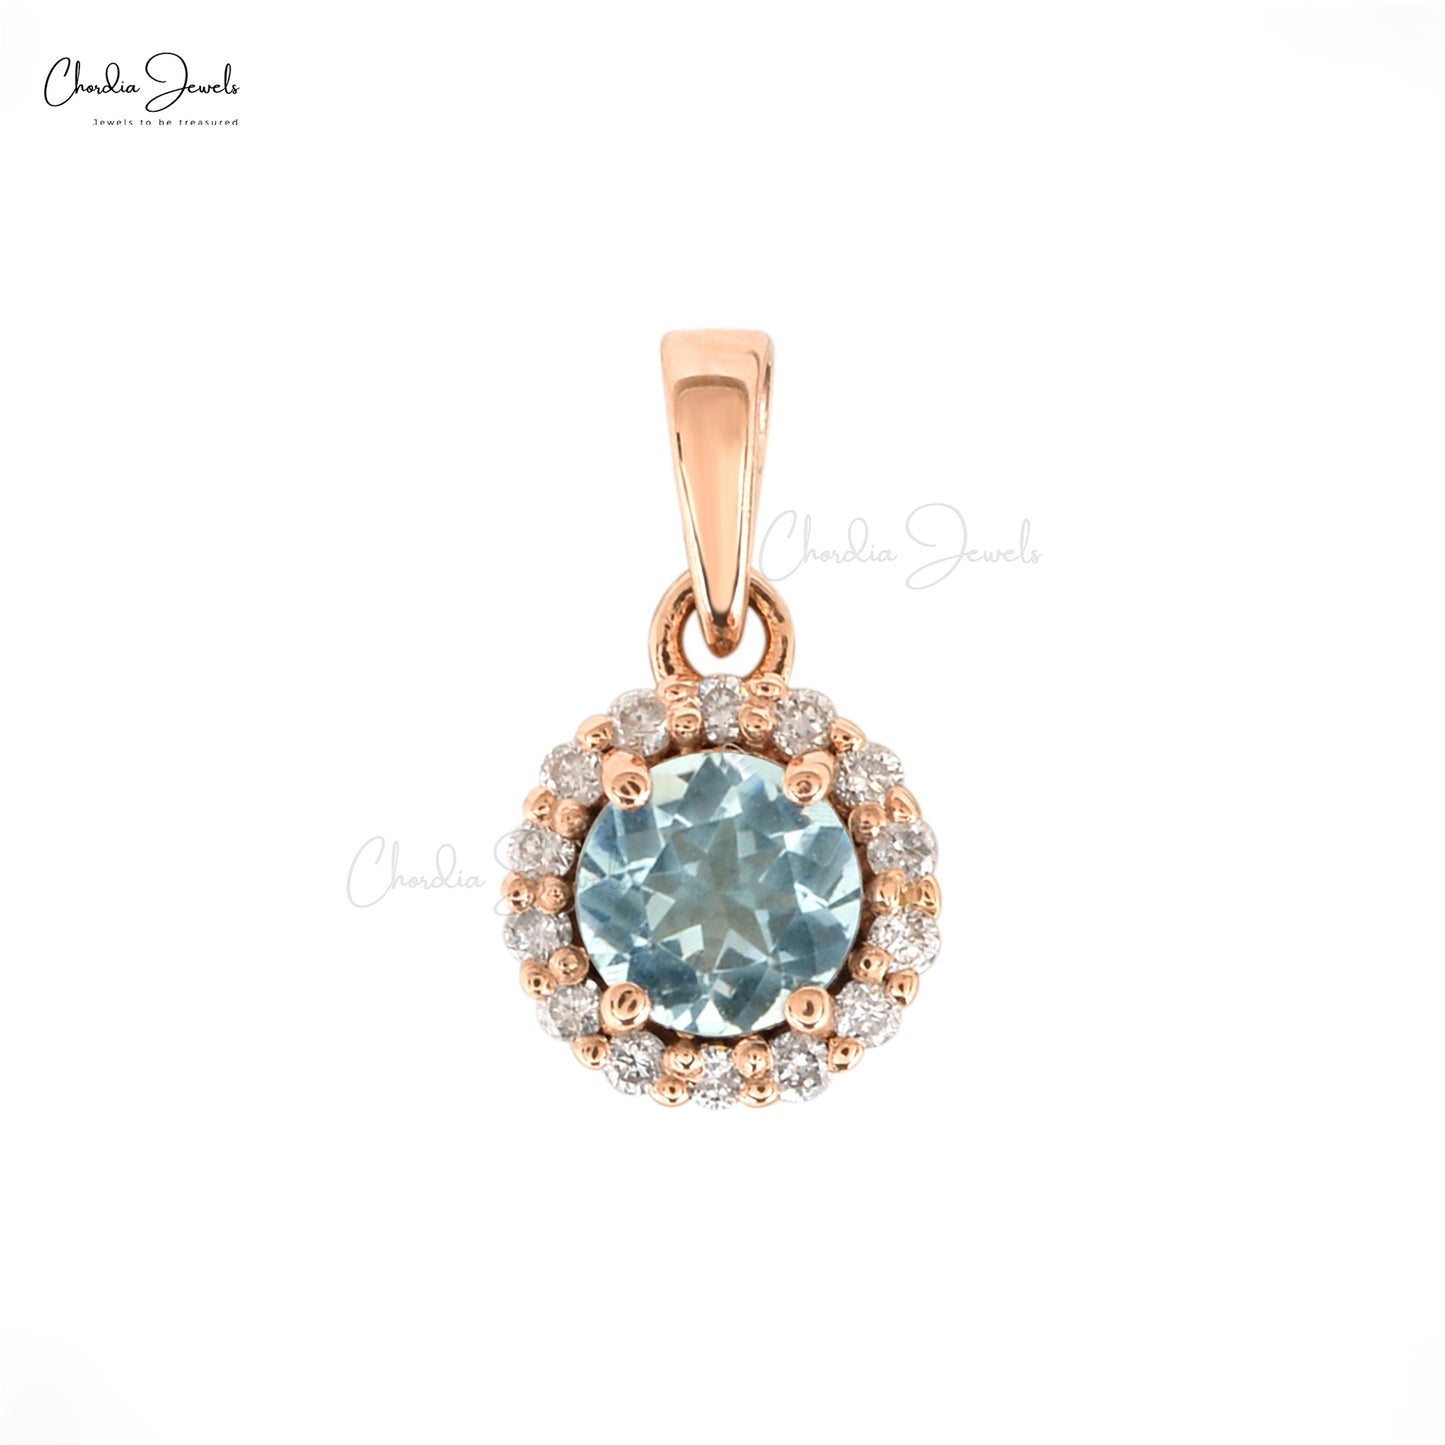 Load image into Gallery viewer, Natural Aquamarine Pendant, 14k Solid Rose Gold Diamond Halo Pendant, 4mm Round Gemstone Prong Set Pendant, March Birthstone Pendant Gift for Her
